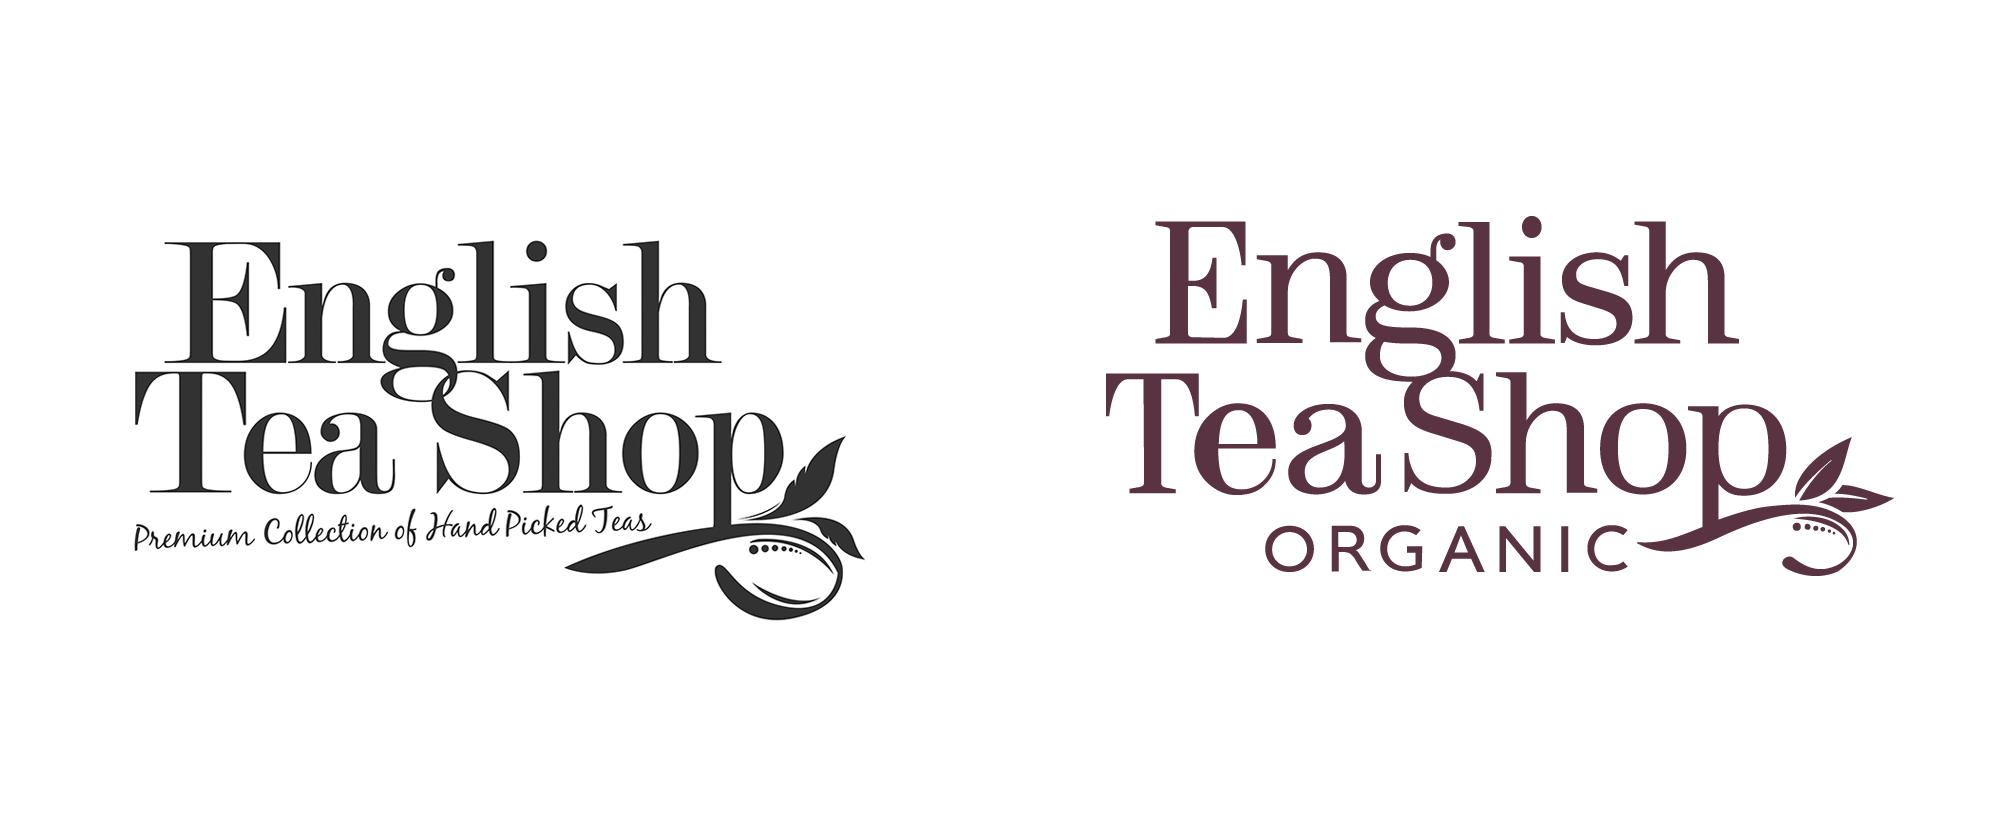 New Logo and Packaging for English Tea Shop by Echo